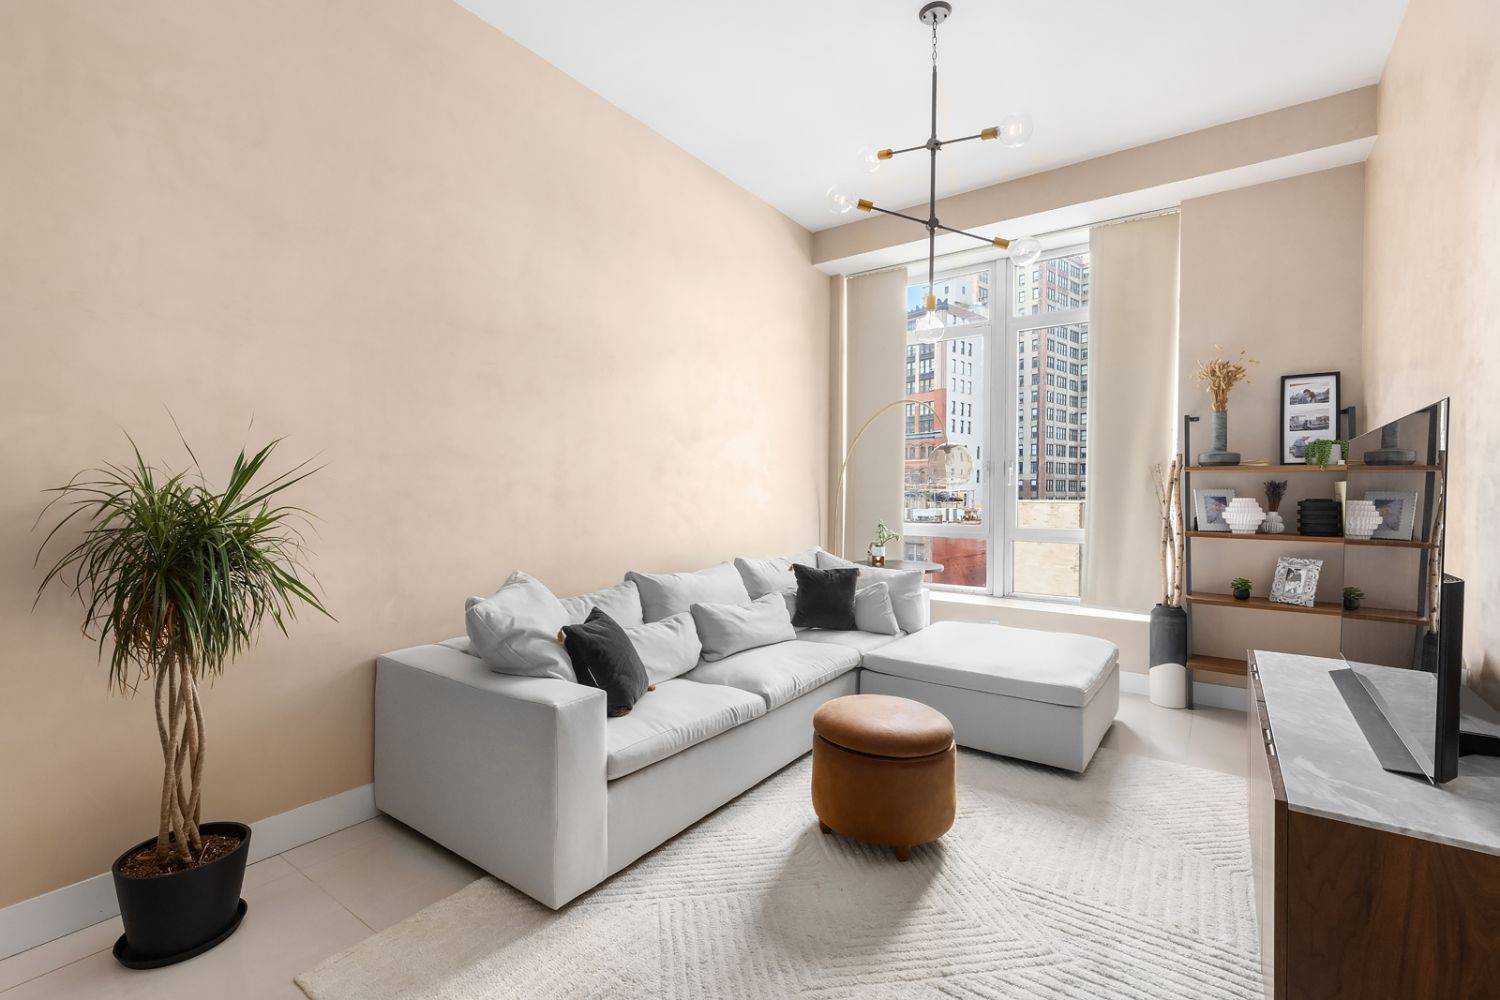 111 Fulton Street District The building boasts 18, 000 square feet of high end amenities including a 24 7 doorman and concierge service, convenient parking available across the street, a ...